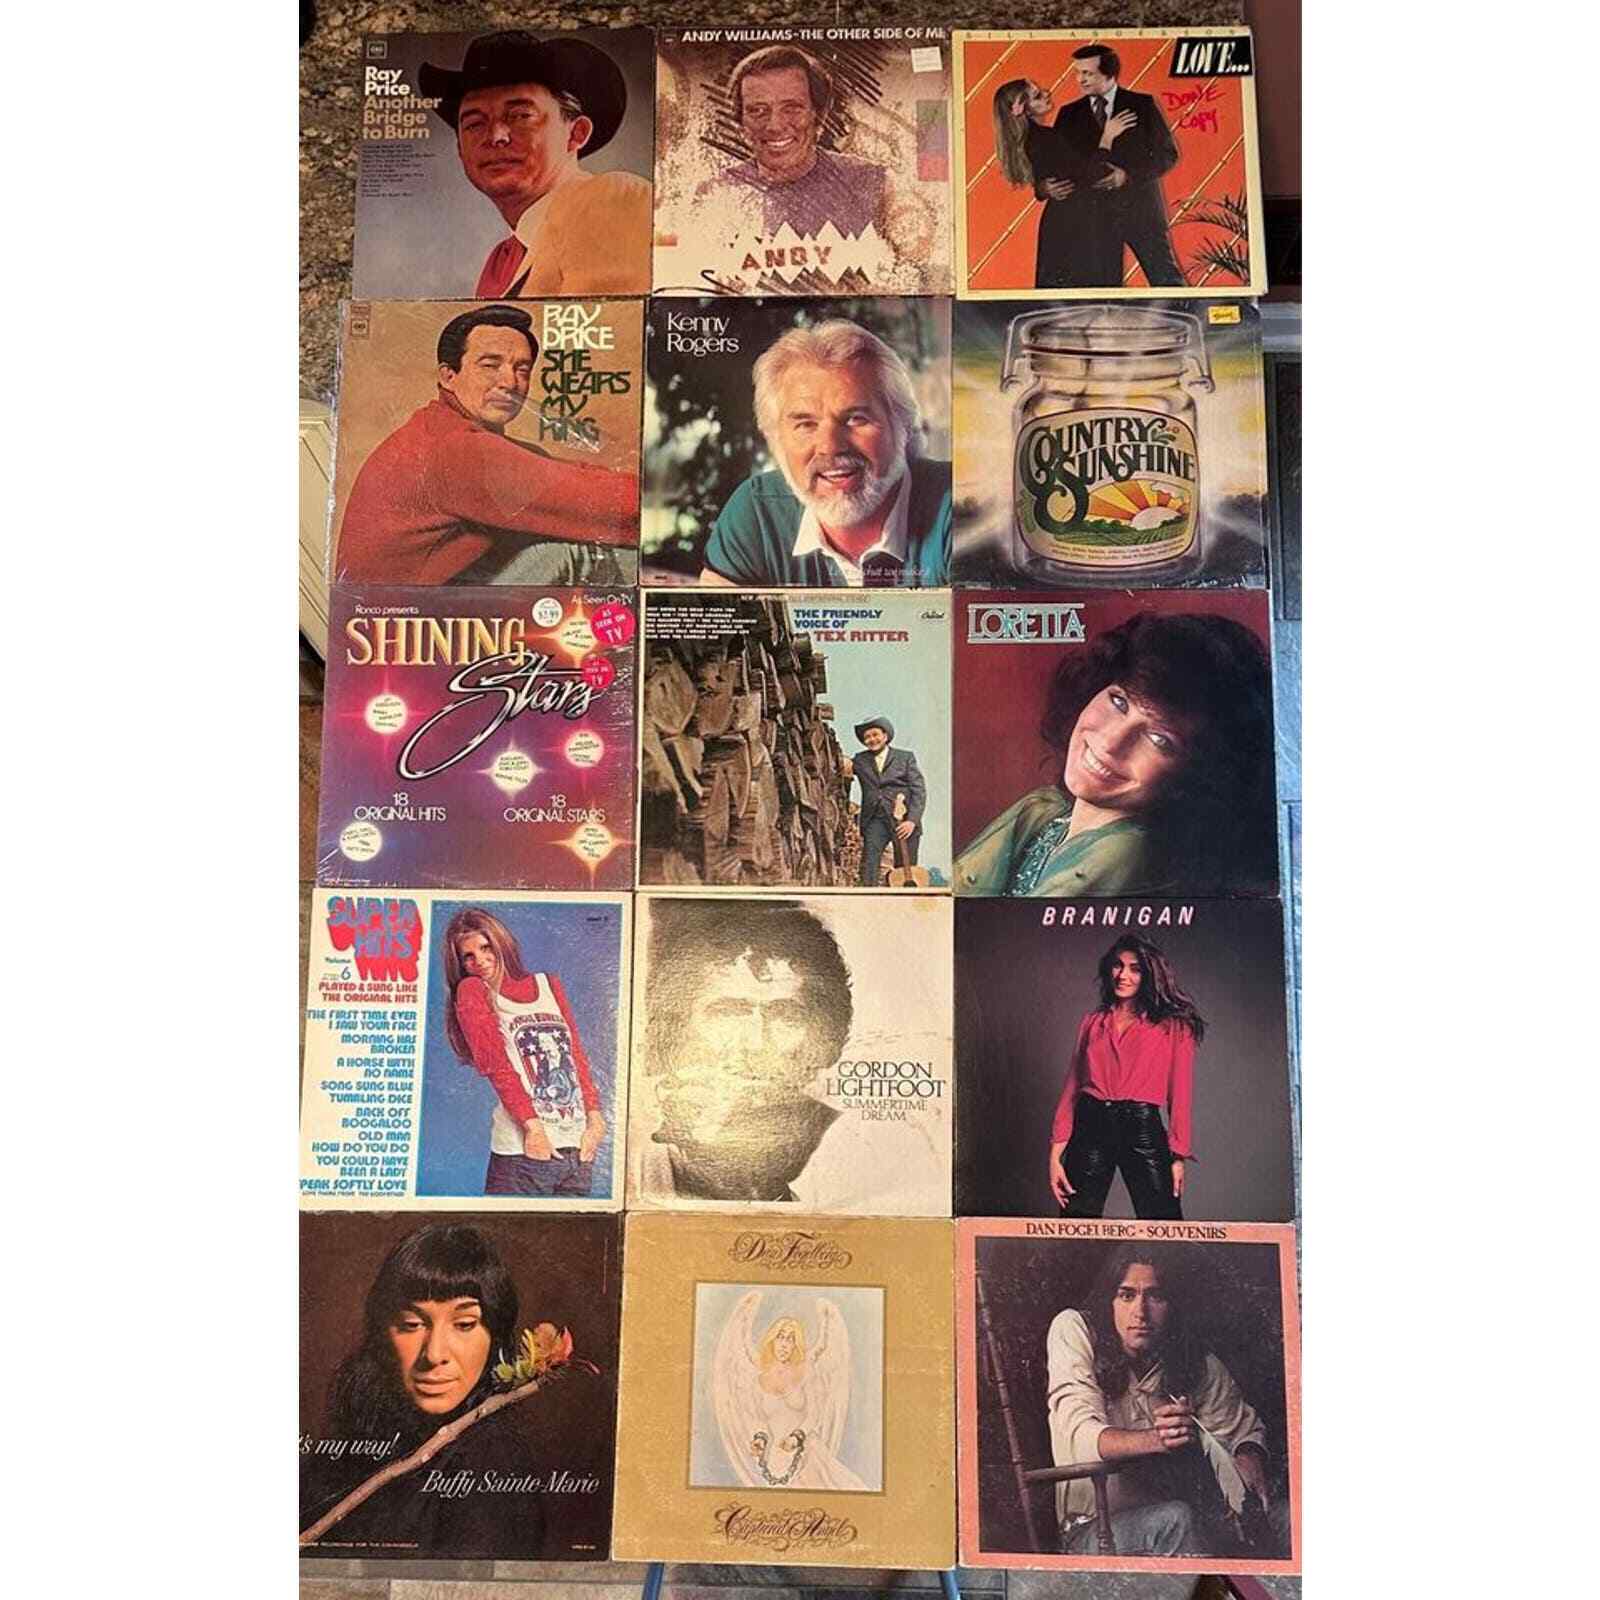 Vinyl Records Vintage Country Western Music Collection of 15 Classic Albums